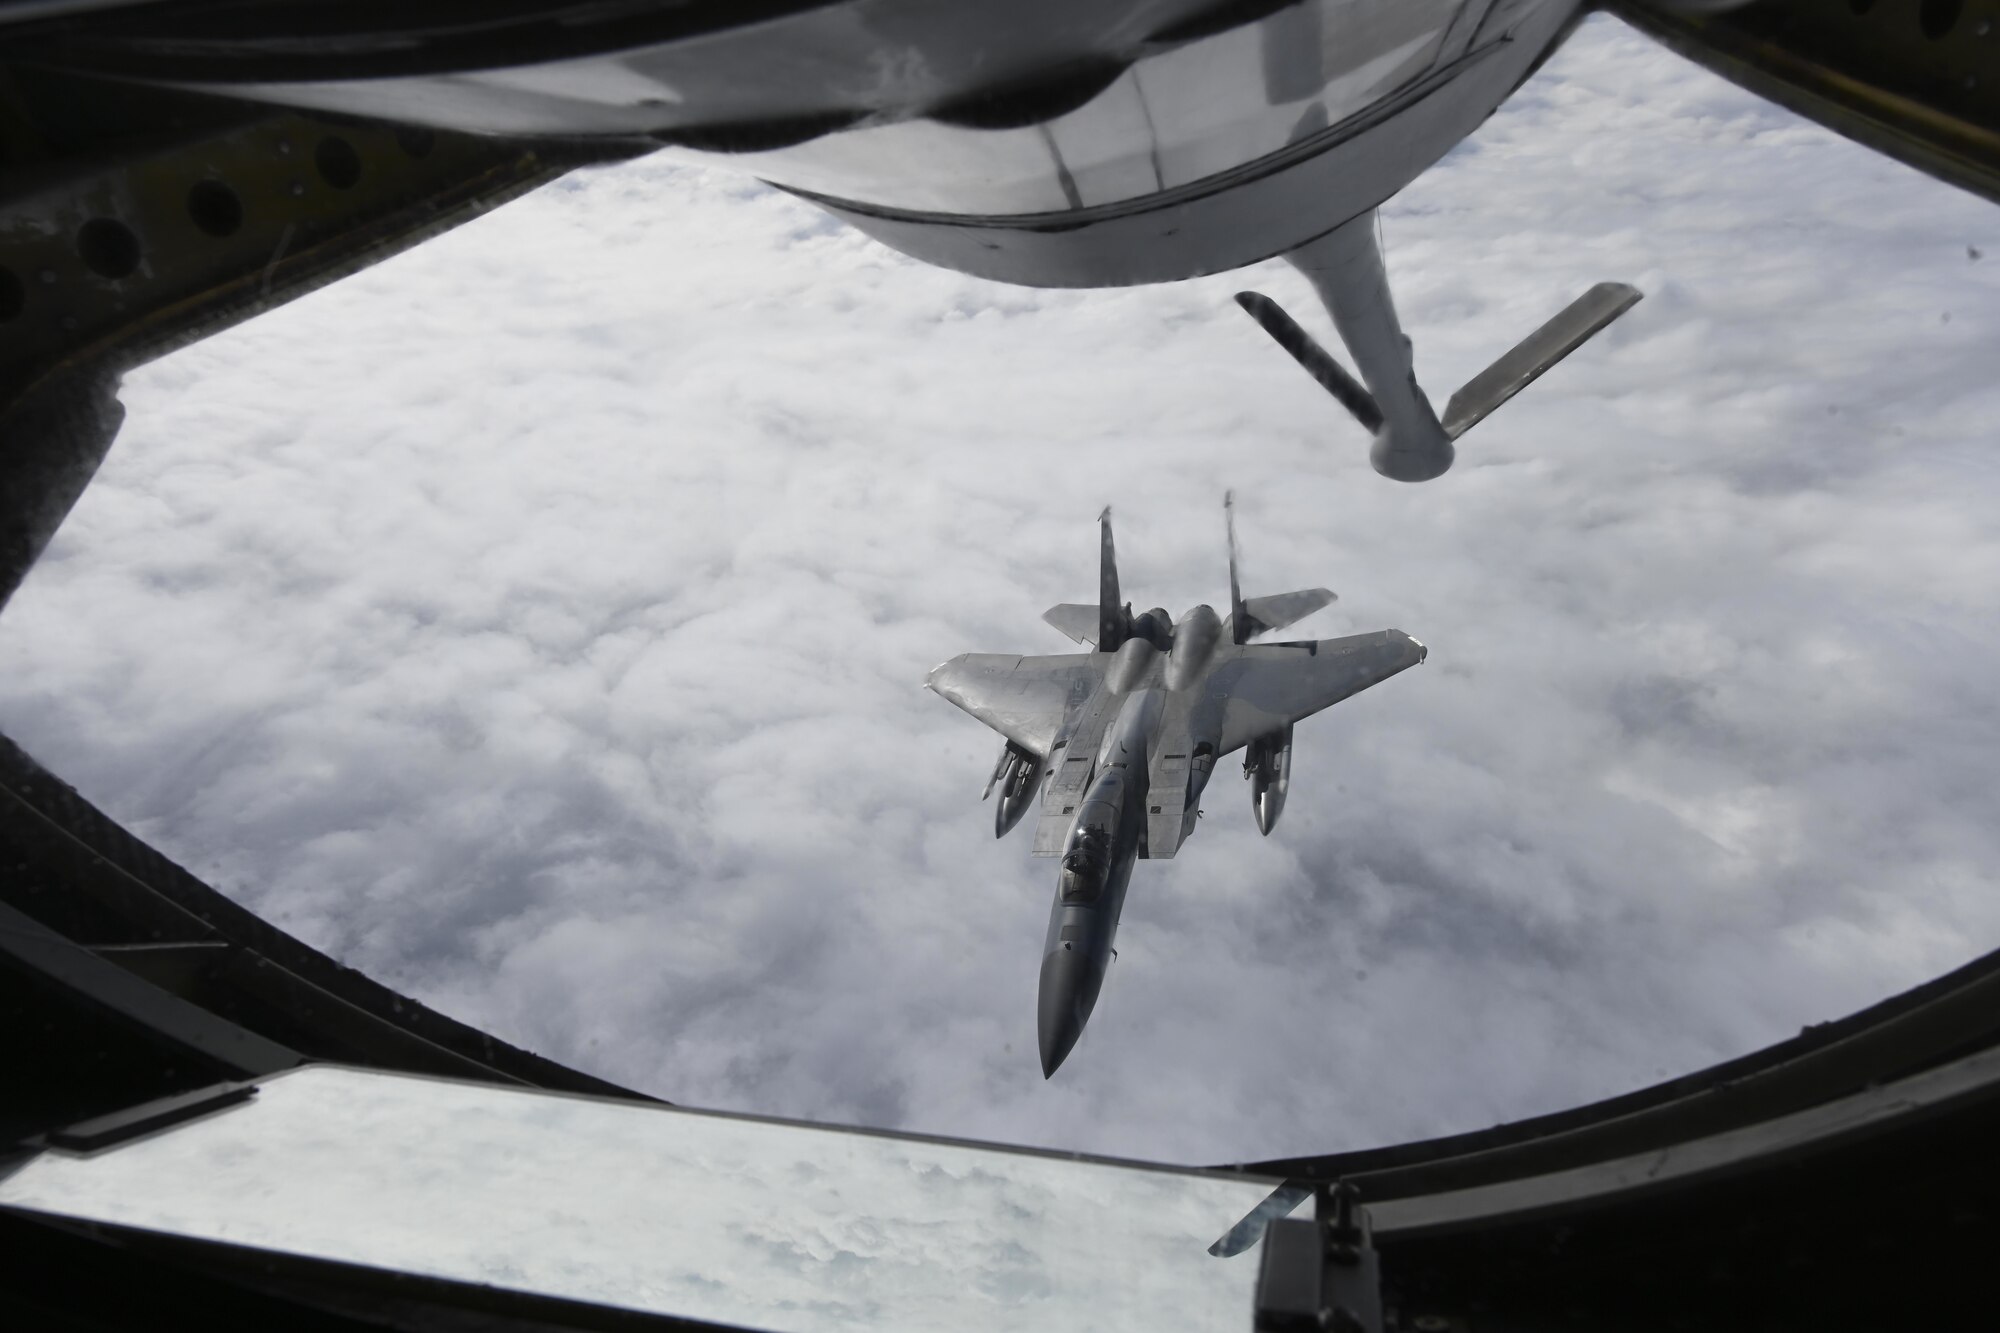 A U.S. Air Force F-15C Eagle aircraft assigned to the 48th Fighter Wing, Royal Air Force Lakenheath, England, departs after receiving fuel from a KC-135 Stratotanker aircraft assigned to the 100th Air Refueling Wing, RAF Mildenhall, England, during exercise High Life over the North Sea, Sept. 15, 2021. Training with joint and combined allies and partners during ACE events increases lethality and enhances interoperability, allowing U.S. forces to counter military aggression and coercion by sharing responsibilities for common defense. (U.S. Air Force photo by Senior Airman Joseph Barron)